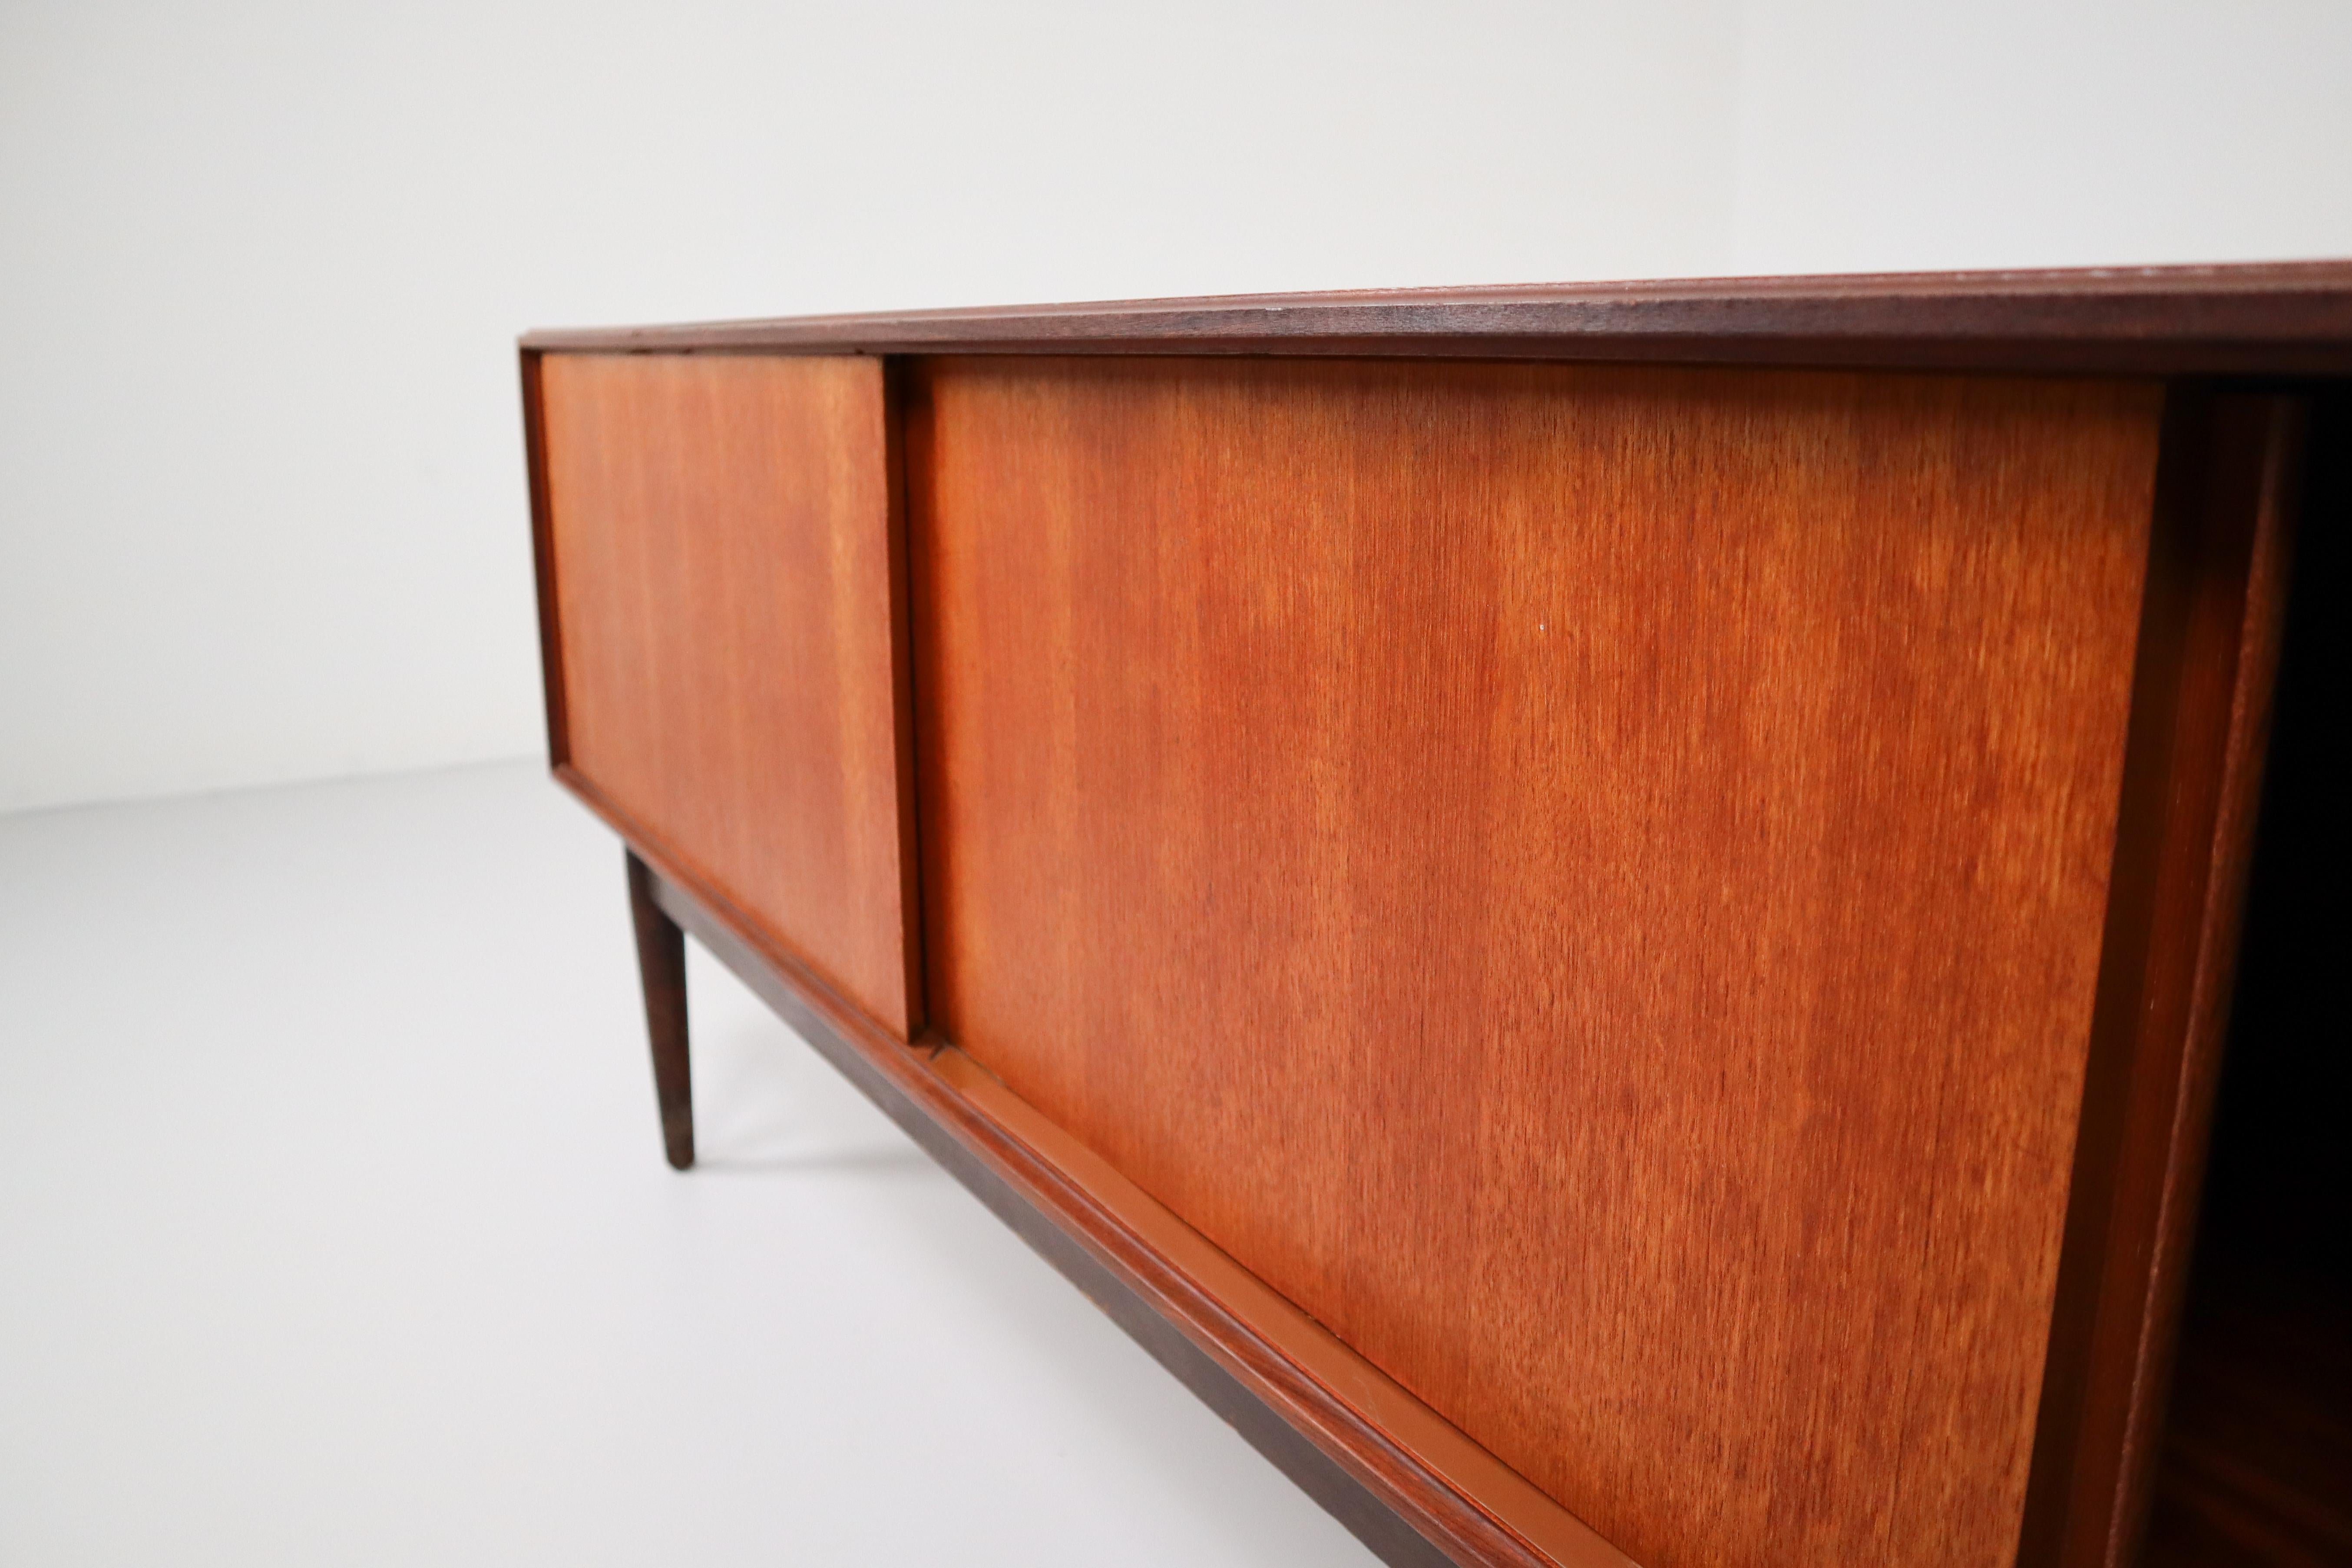 Danish Minimalism Teak Sideboard or Credenza from the 1960s, Made in Denmark